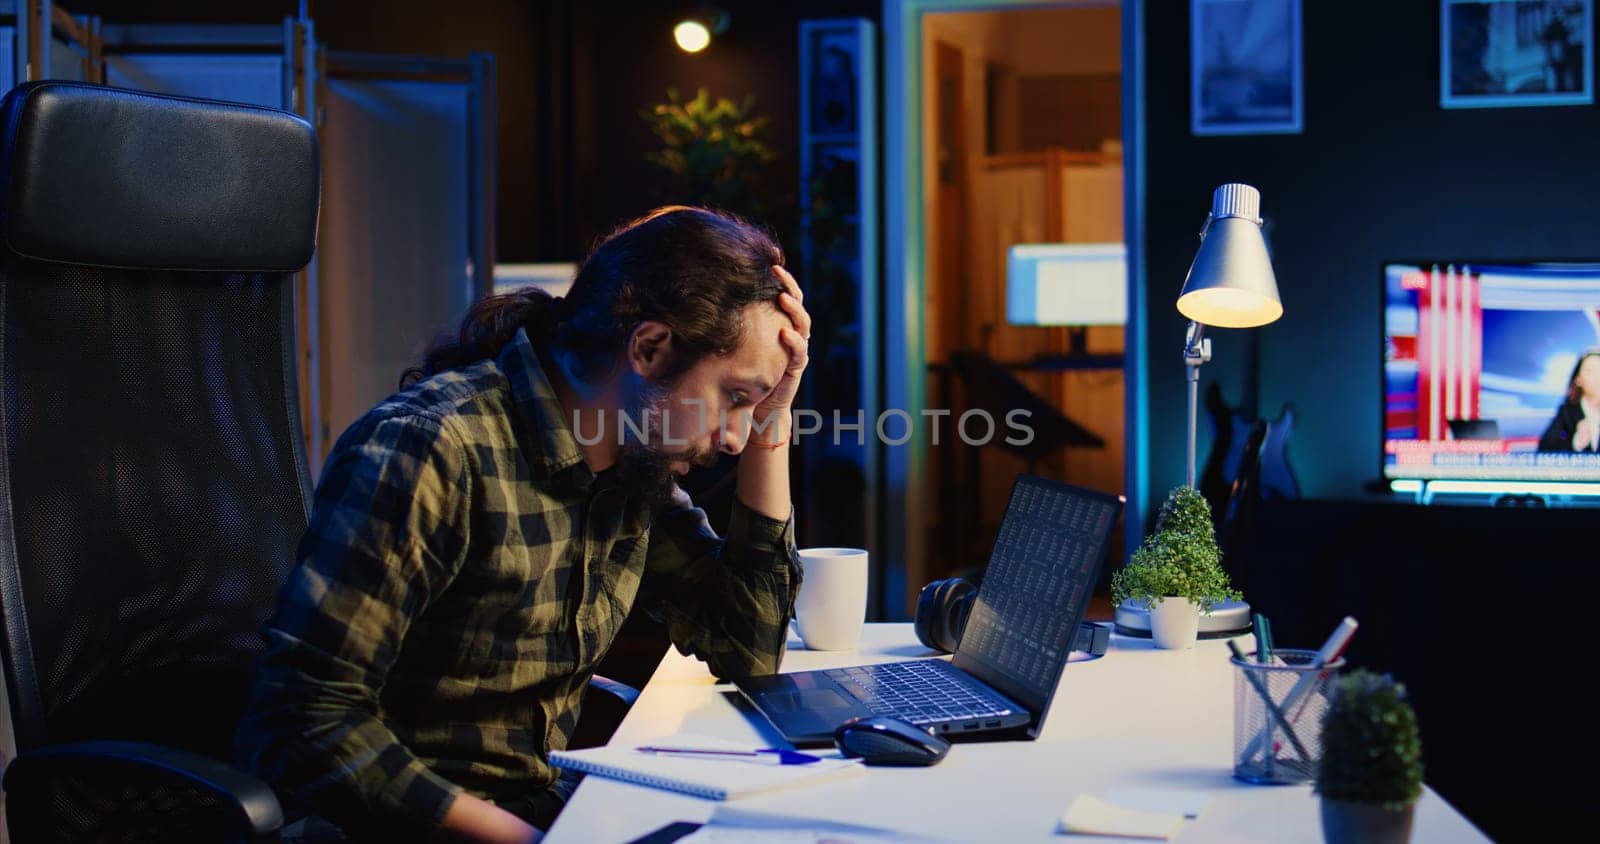 Upset broker investor in home office troubled by low stock exchange valuation, losing money. Freelancer in apartment sighing in frustration after seeing market shares plummeting, camera B